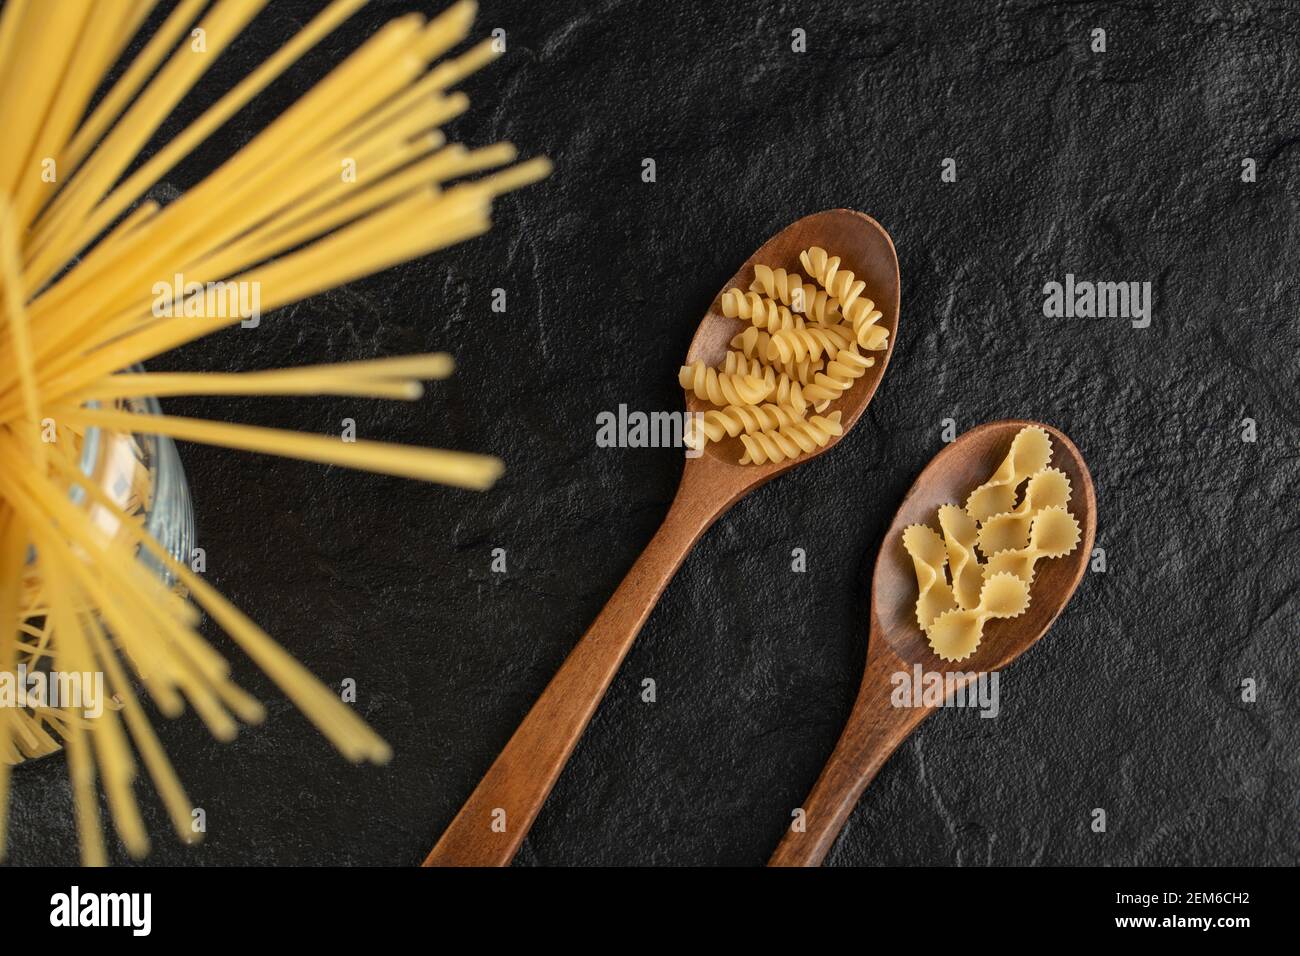 Three types of uncooked pasta on a black background Stock Photo